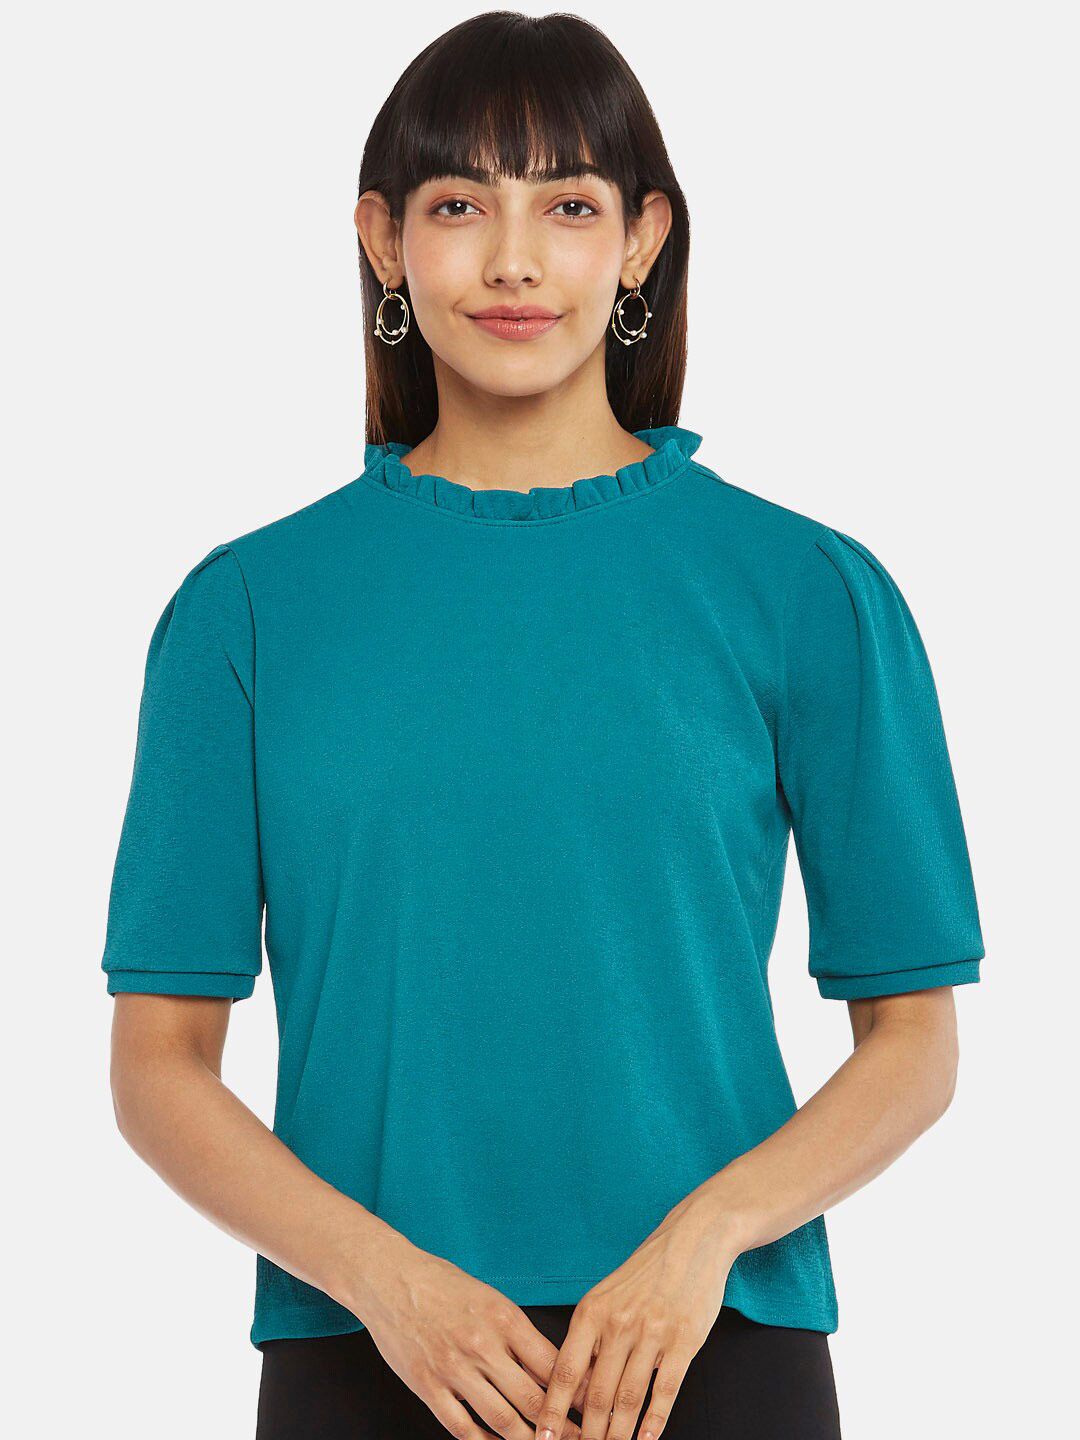 Annabelle by Pantaloons Turquoise Blue Solid Ruffles Neck Top Price in India